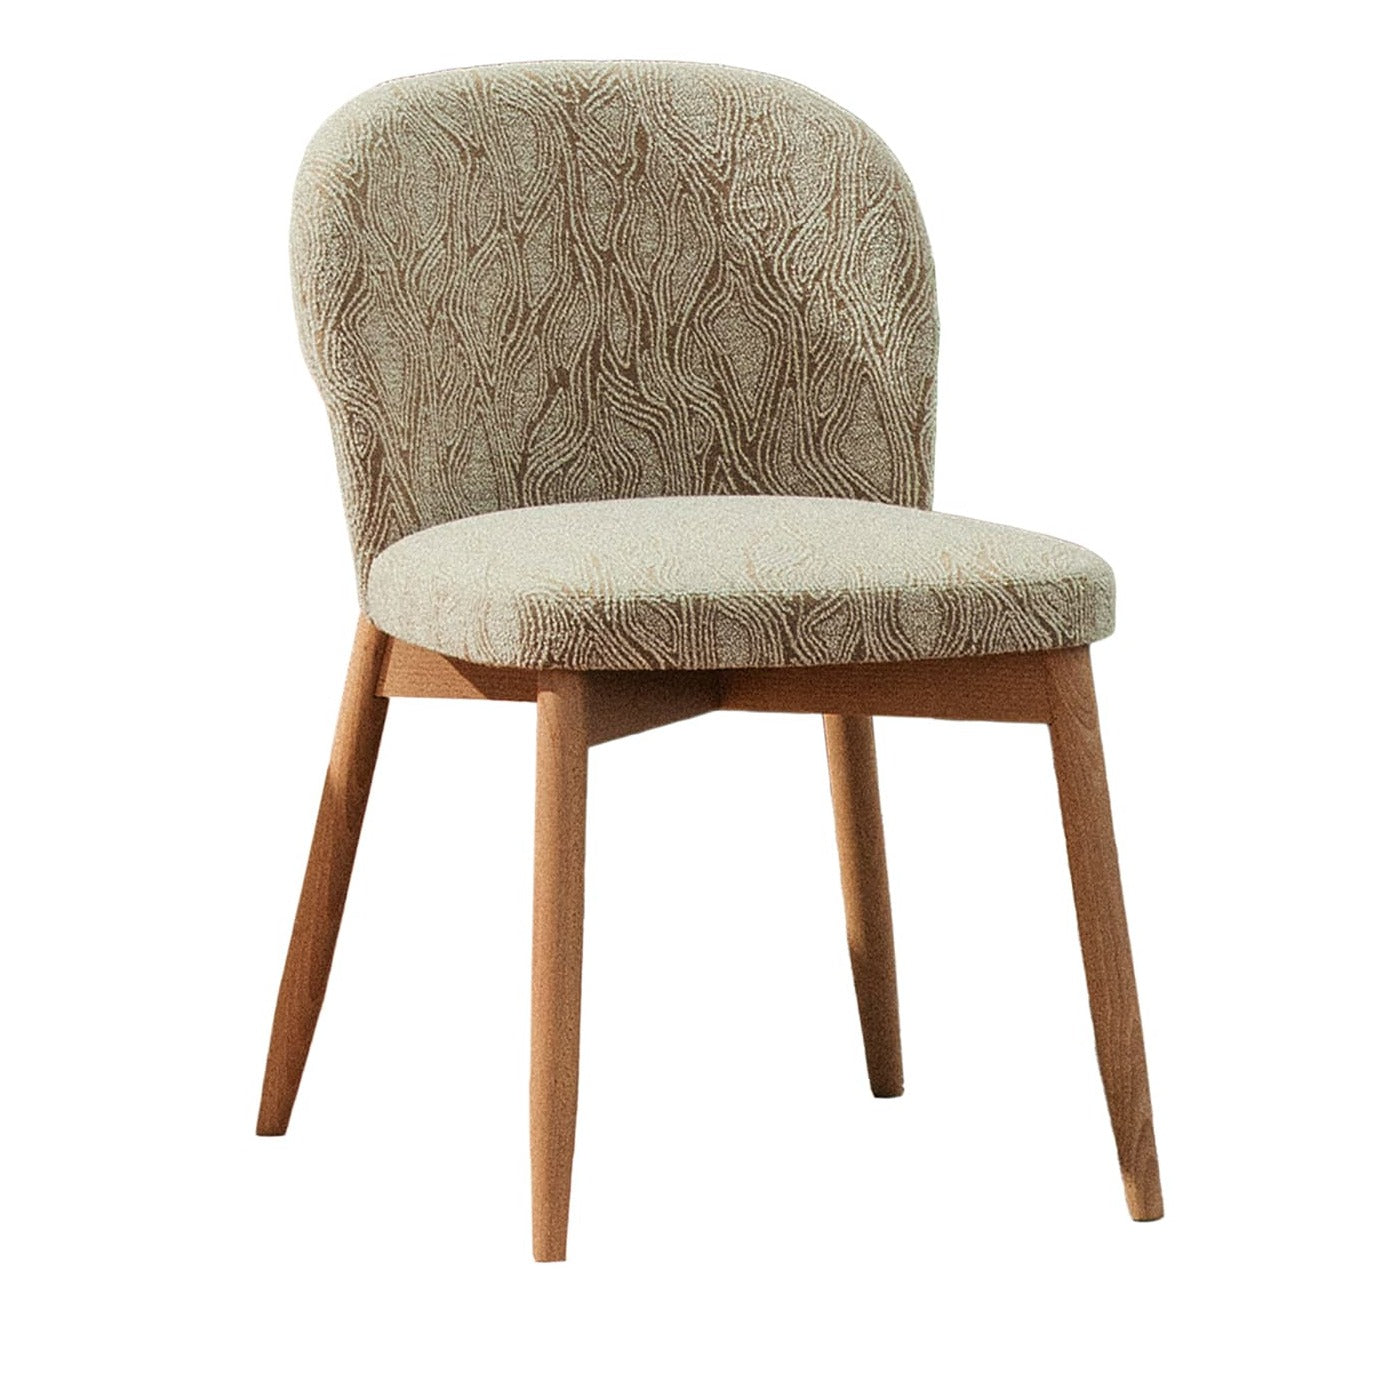 Spy Upholstered Chair 660